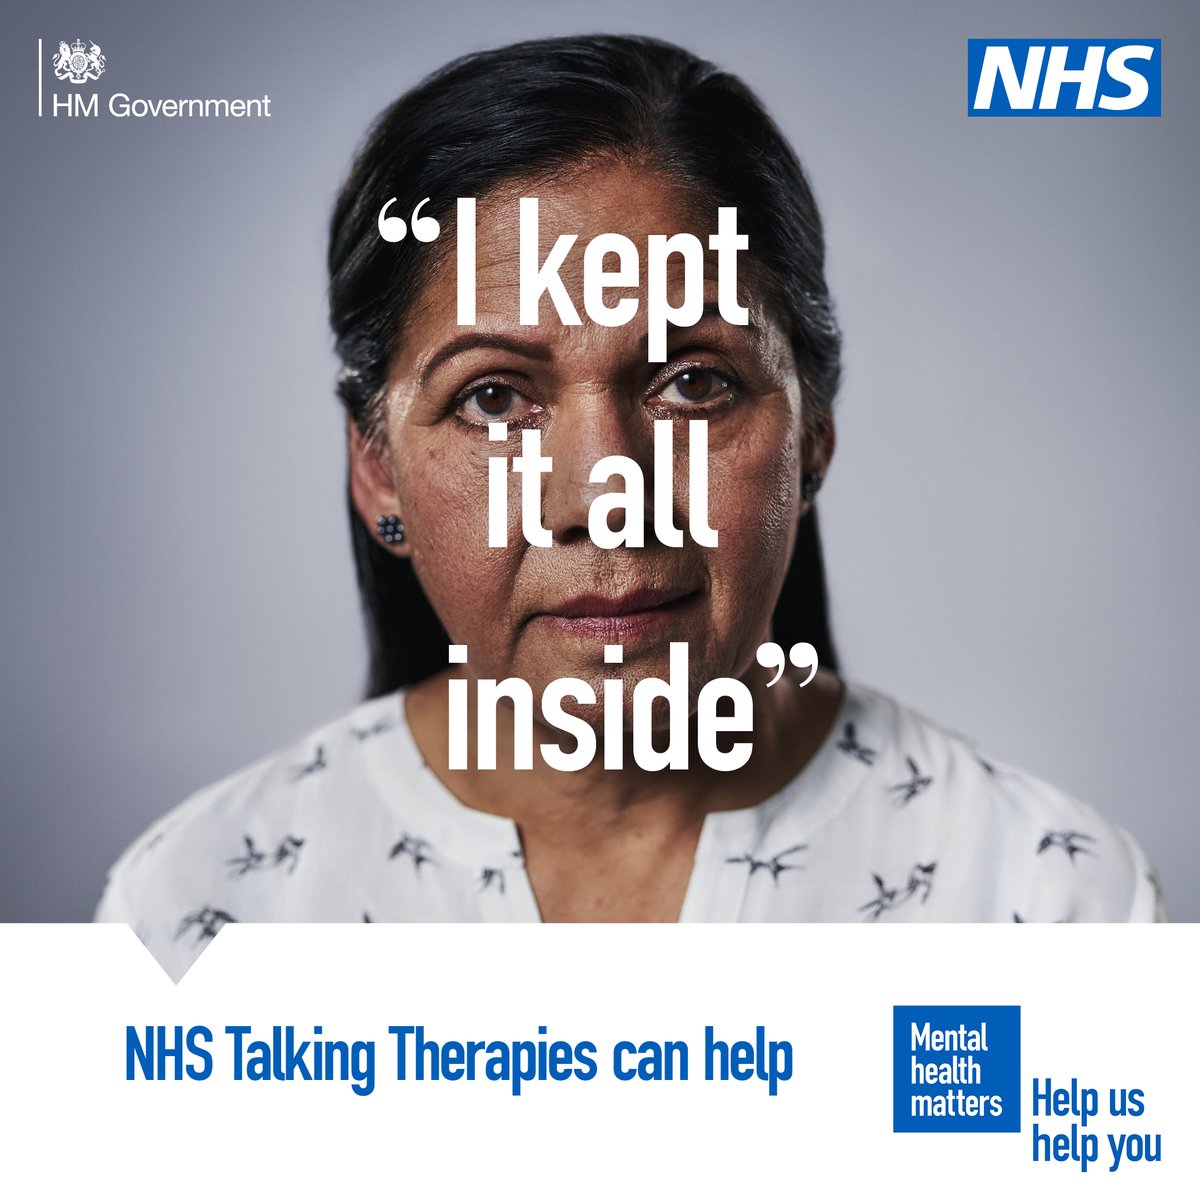 Struggling with feelings of depression, excessive worry, social anxiety, post-traumatic stress or obsessions and compulsions? NHS Talking Therapies can help. The service is effective, confidential and free. Your GP can refer you or refer yourself at nhs.uk/mental-health/…